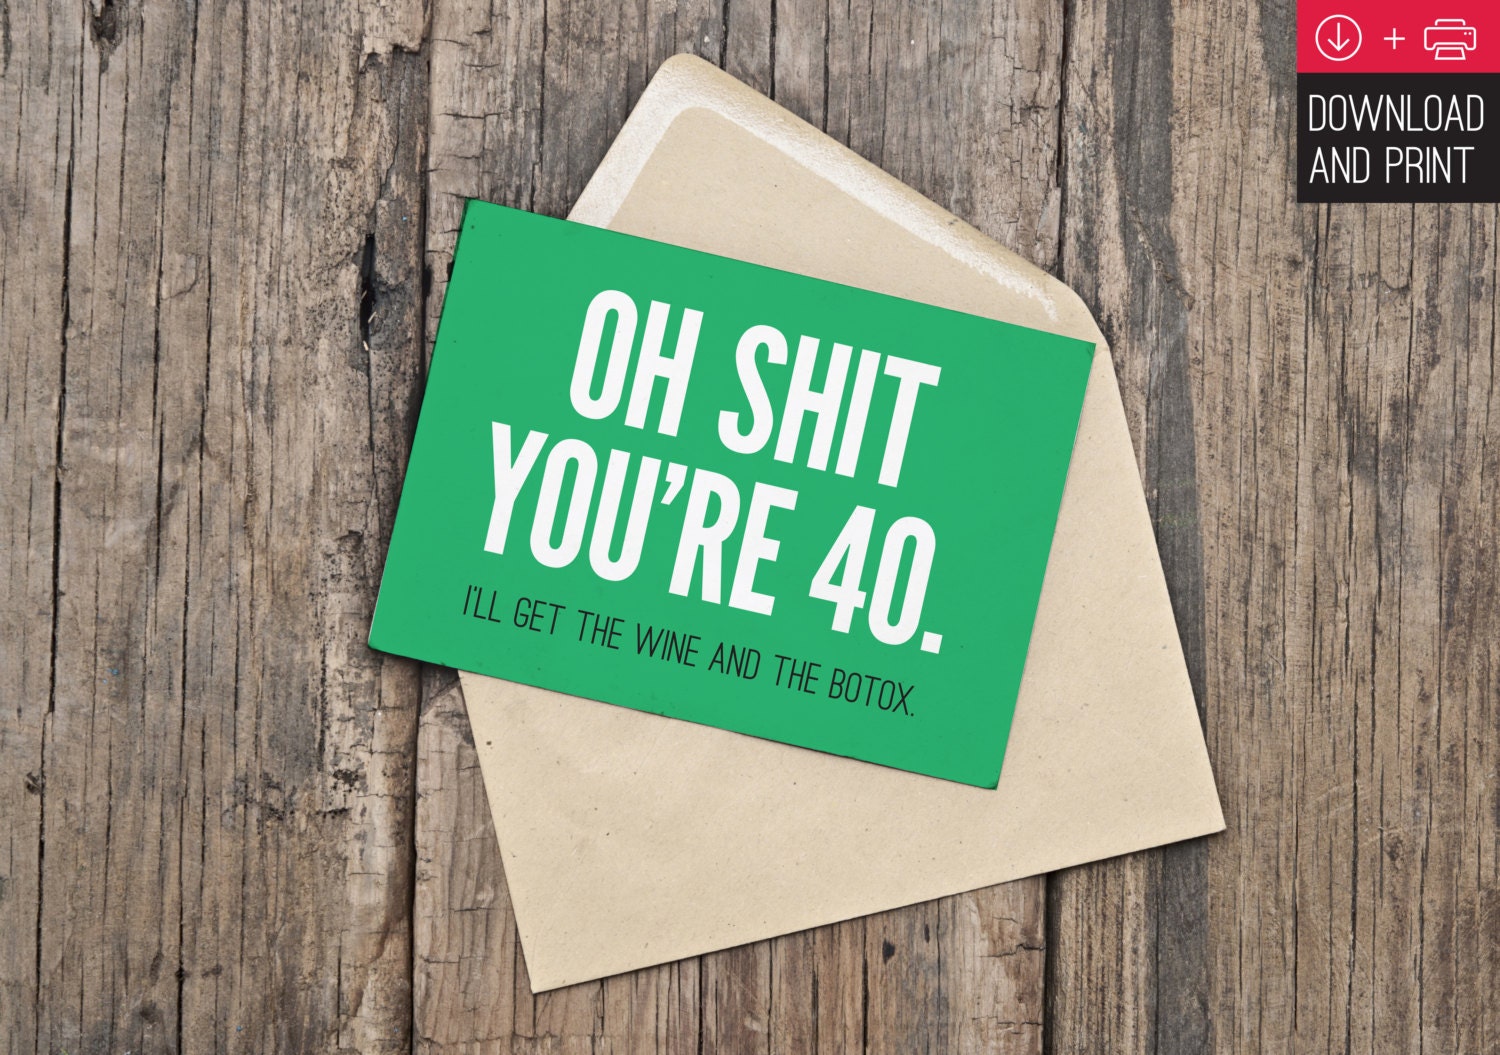 messages-funny-40th-birthday-one-liners-funny-birthday-card-messages